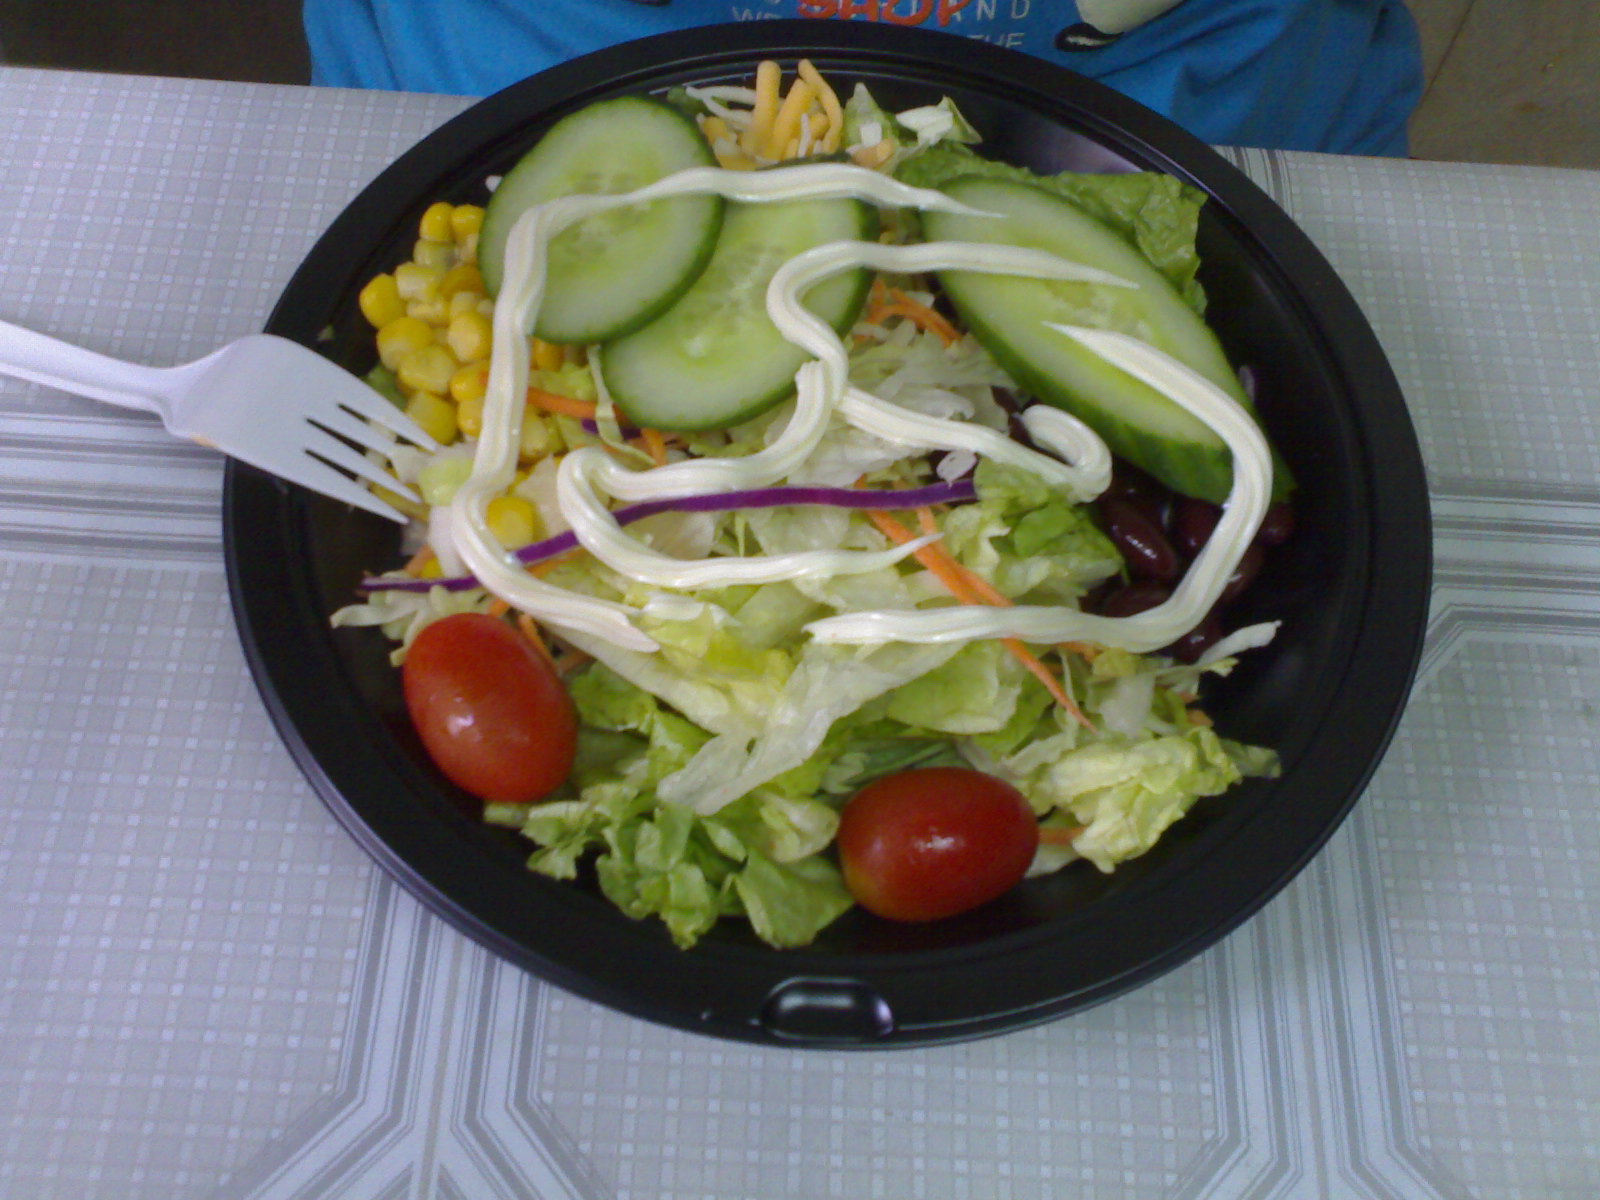 a salad sits on a black plate with a fork